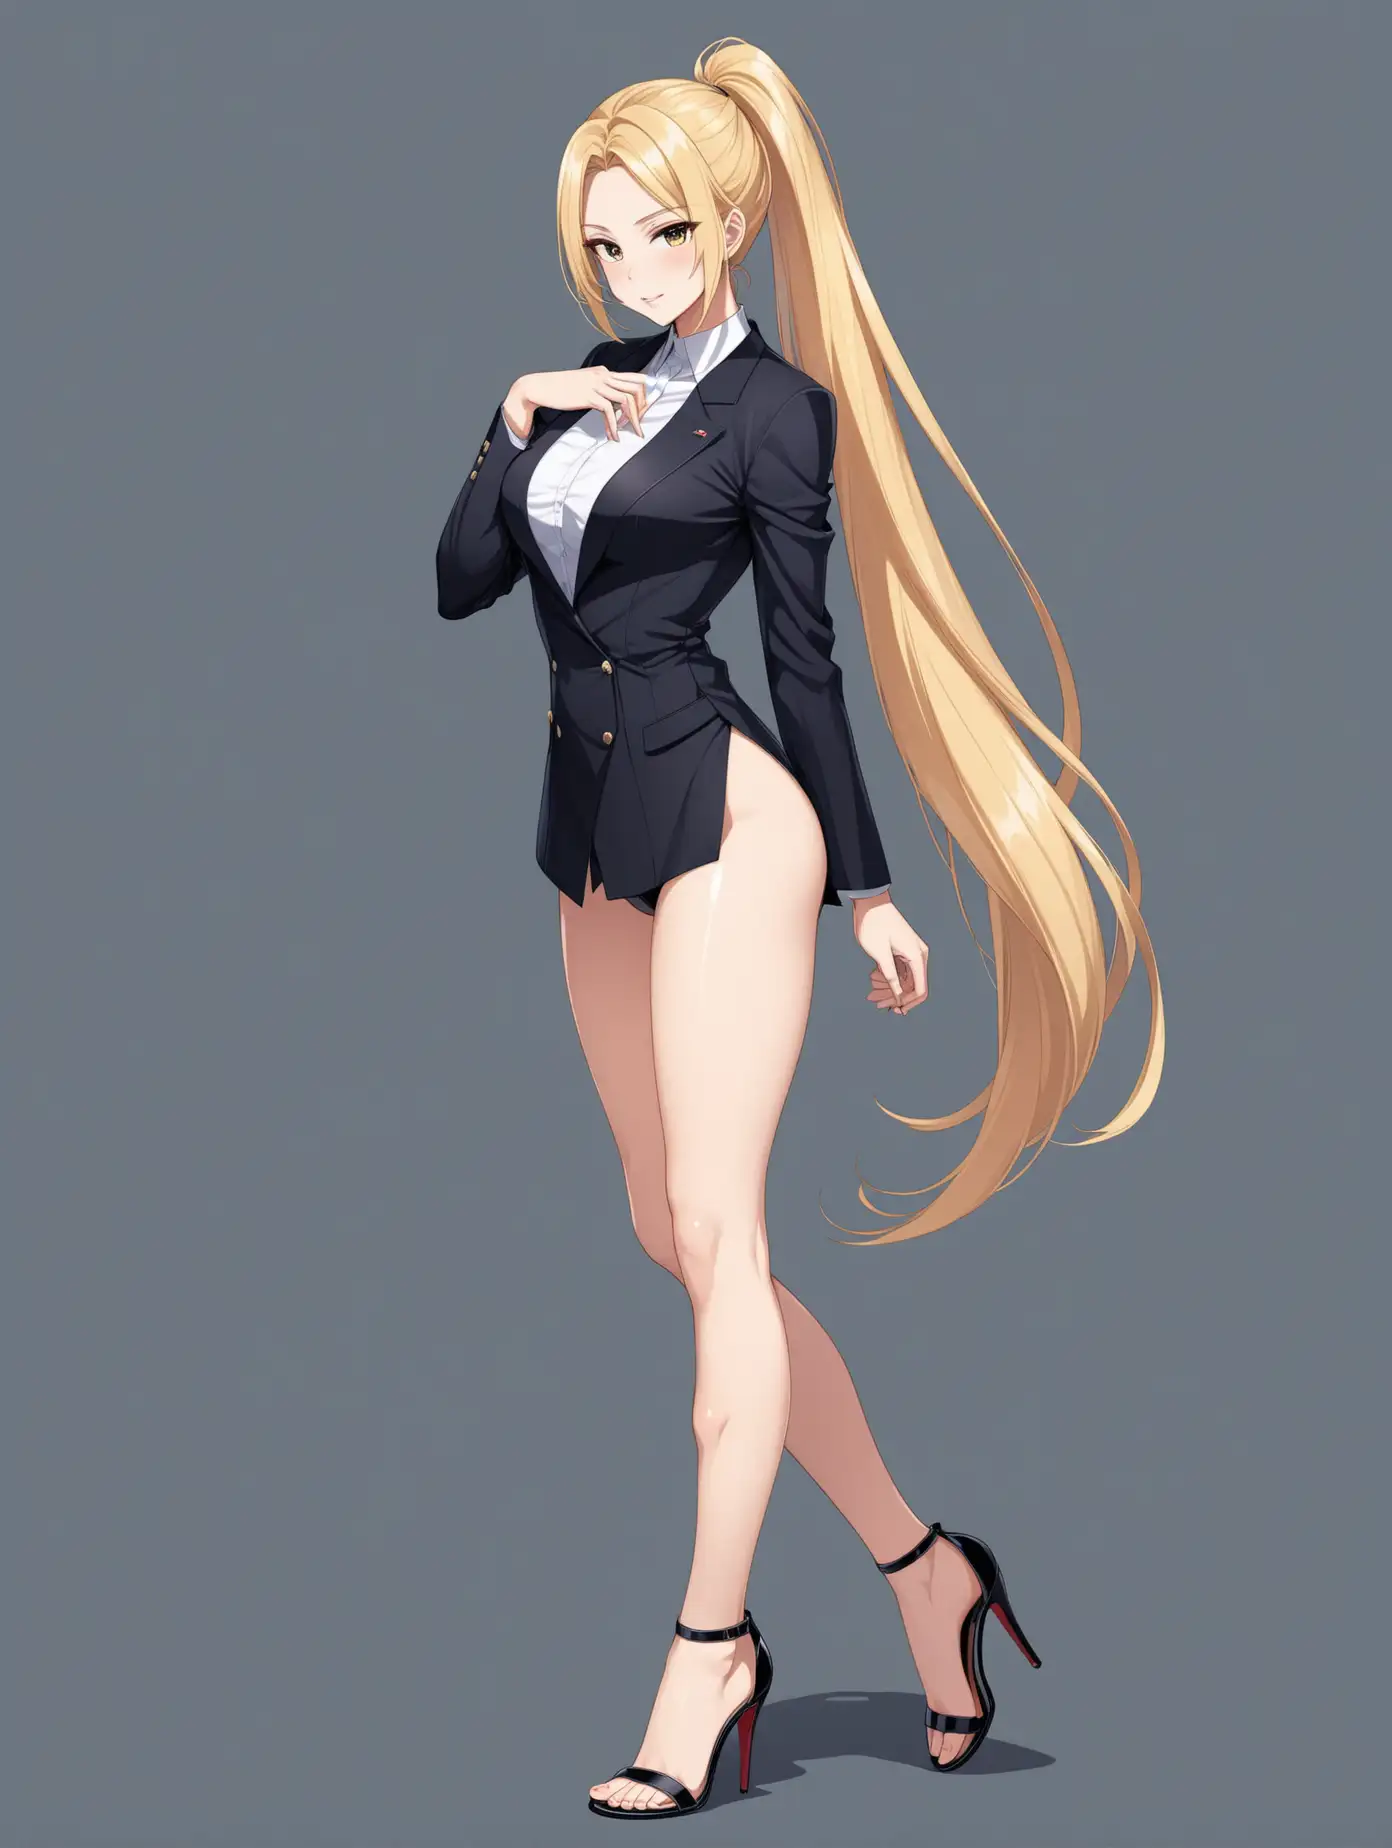 Elegant-Anime-Girl-Political-Leader-in-Hot-Pose-with-Blonde-Hair